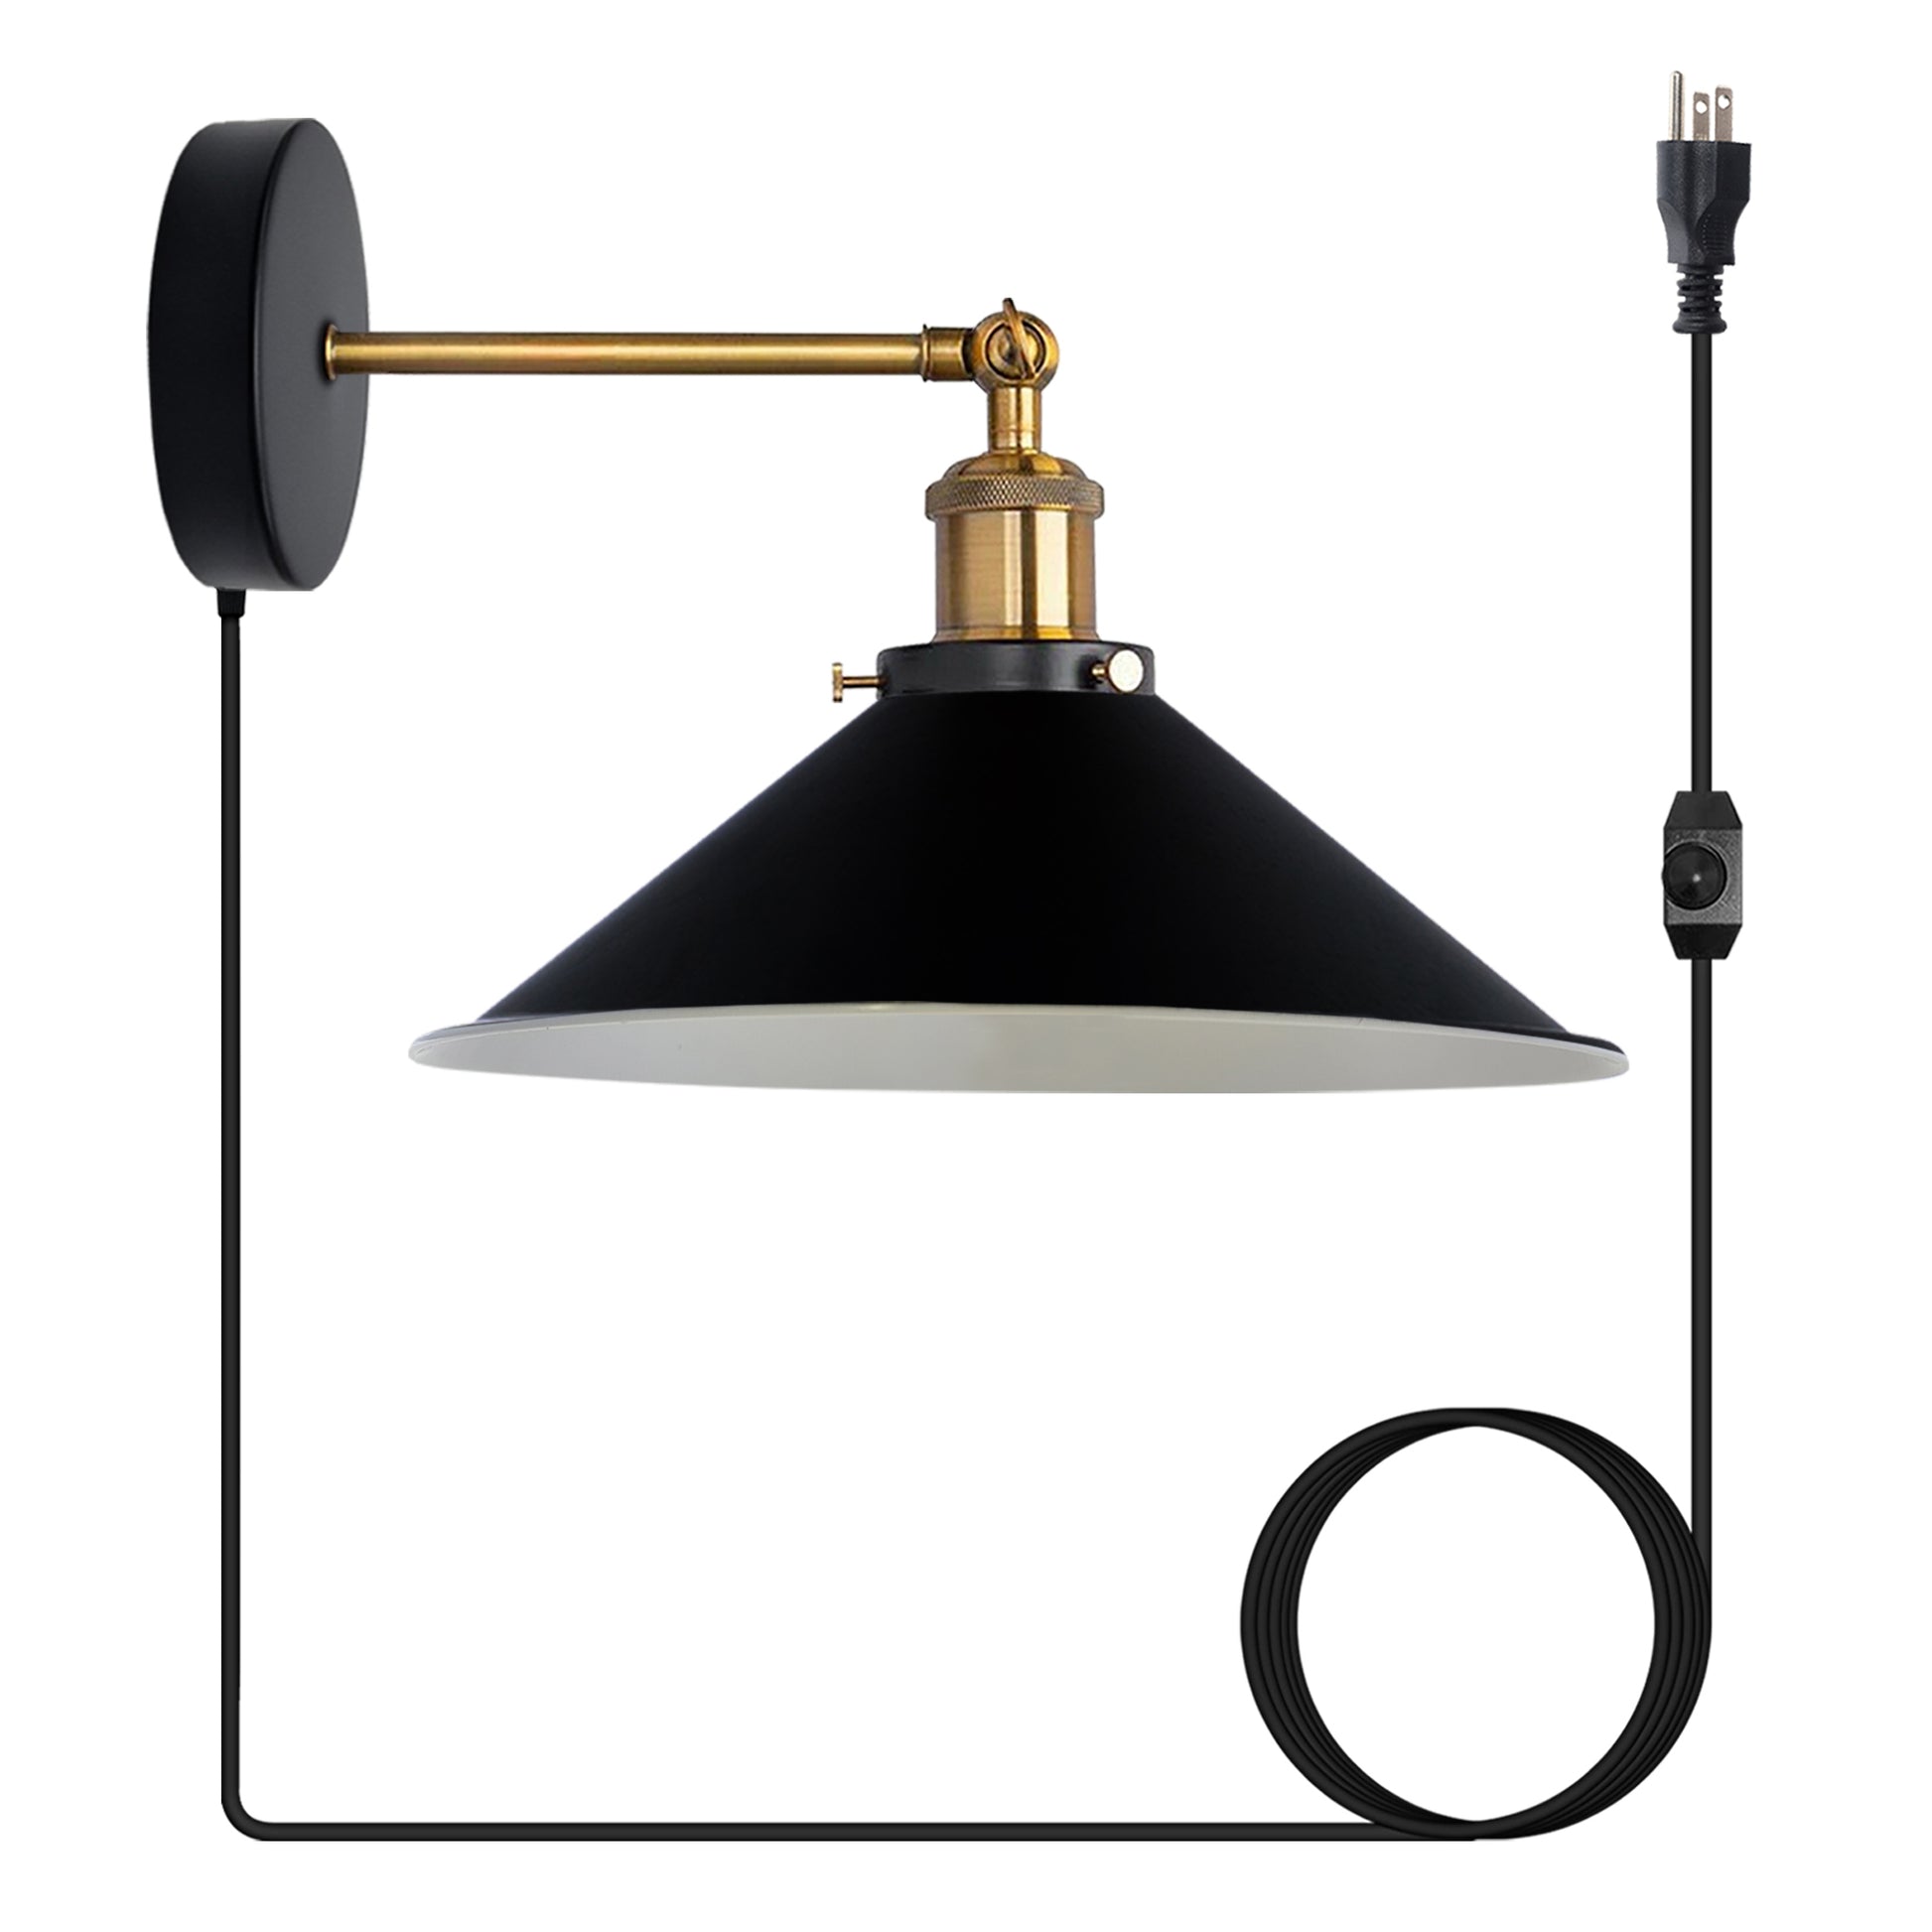 black Plug-in Wall Light Sconces with Dimmer Switch.JPG